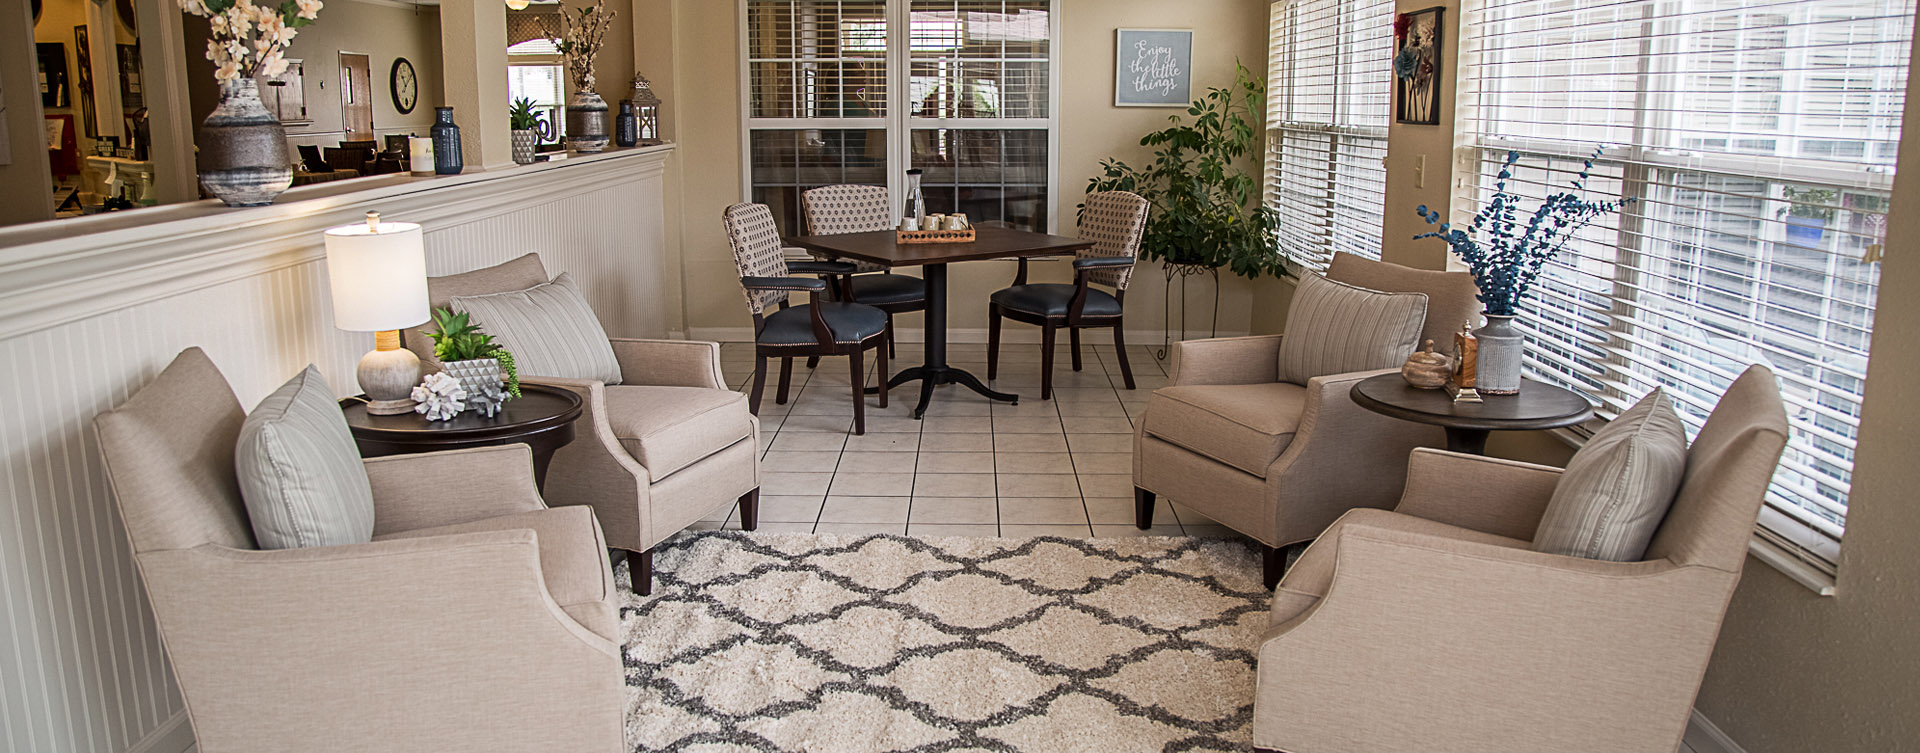 Relax in the warmth of the sunroom at Bickford of Davenport